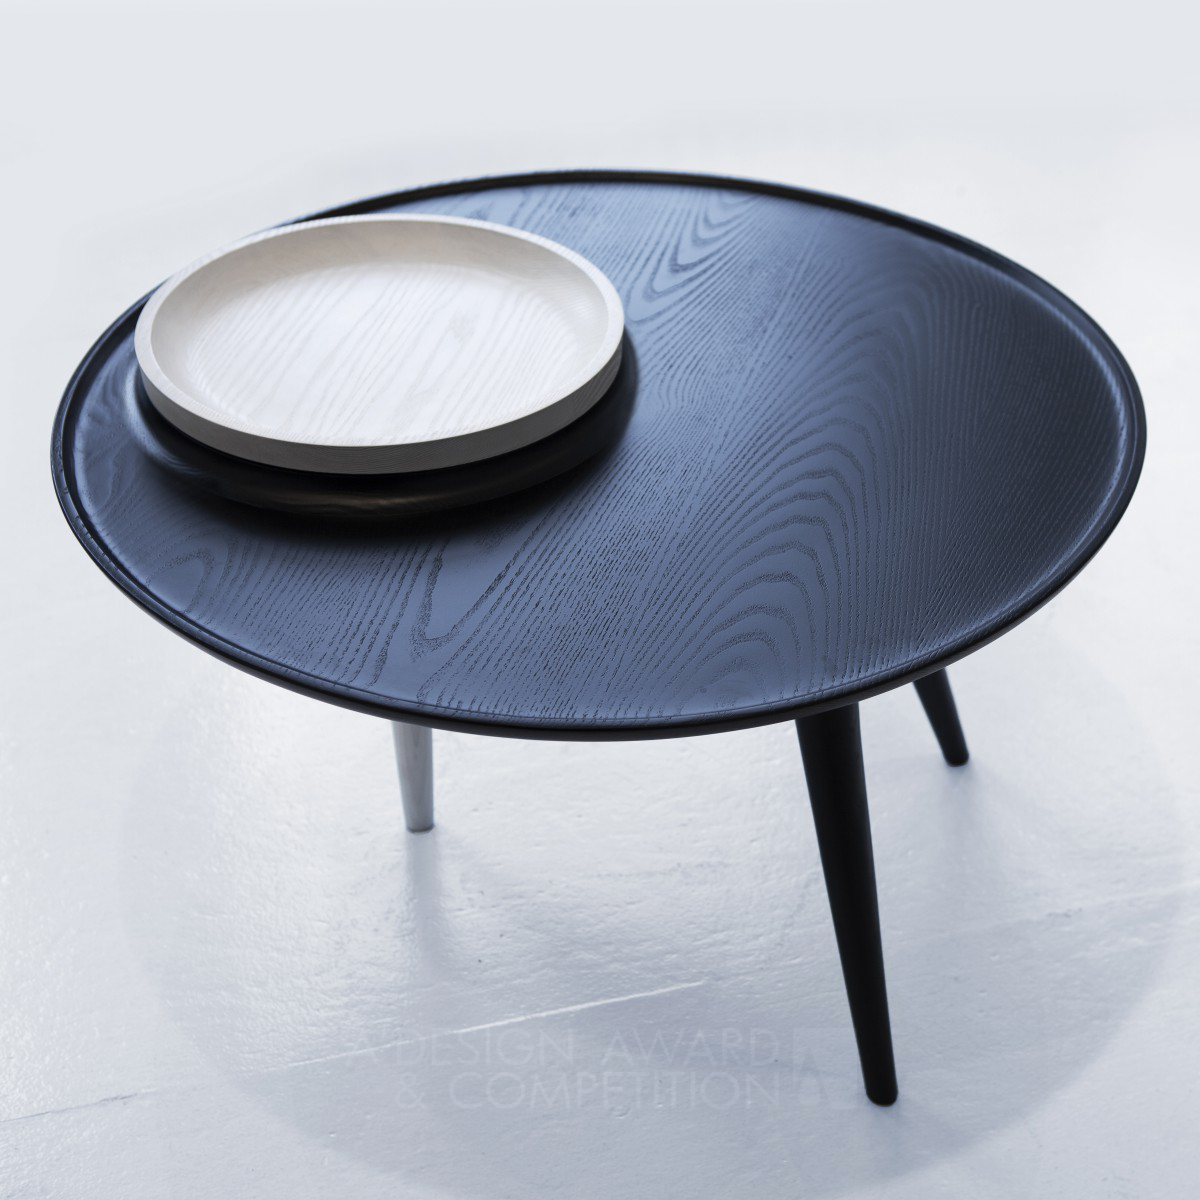 Codependent Table by Fletcher Eshbaugh